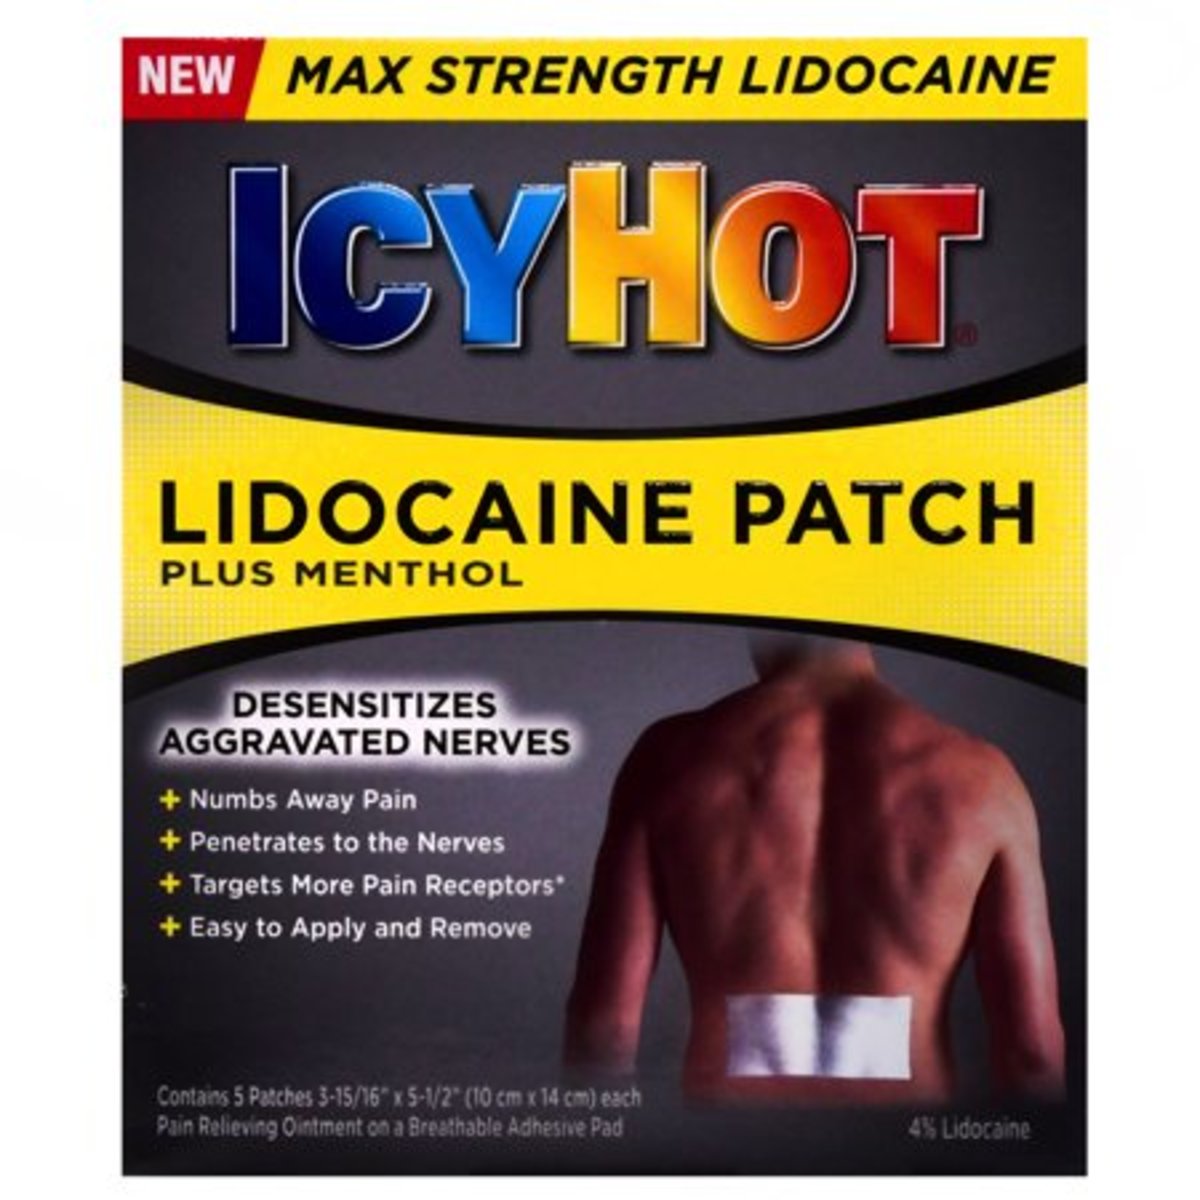 IcyHot Lidocaine patches are the best for pain relief!